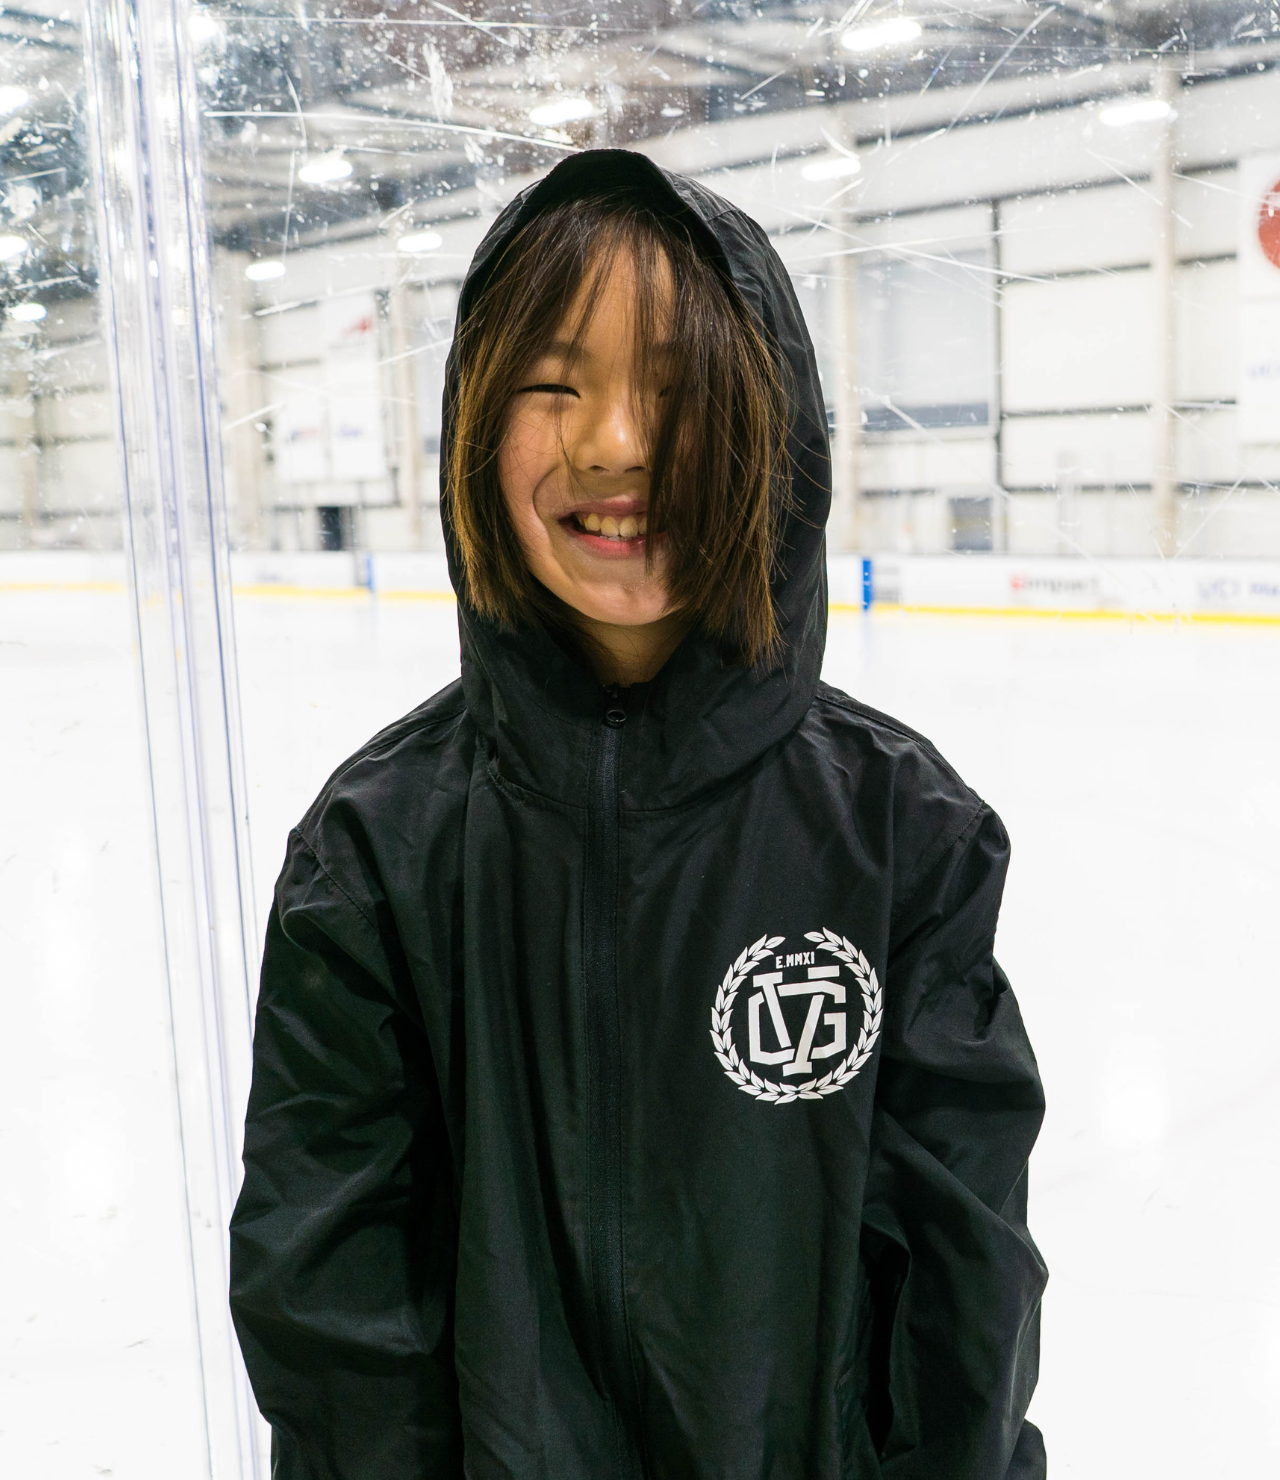 Orquest aedelweiss hockey clothing company - built by hockey fans for hockey fans. New kids youth apparel available today. Shop the entire youth hockey apparel collection today!